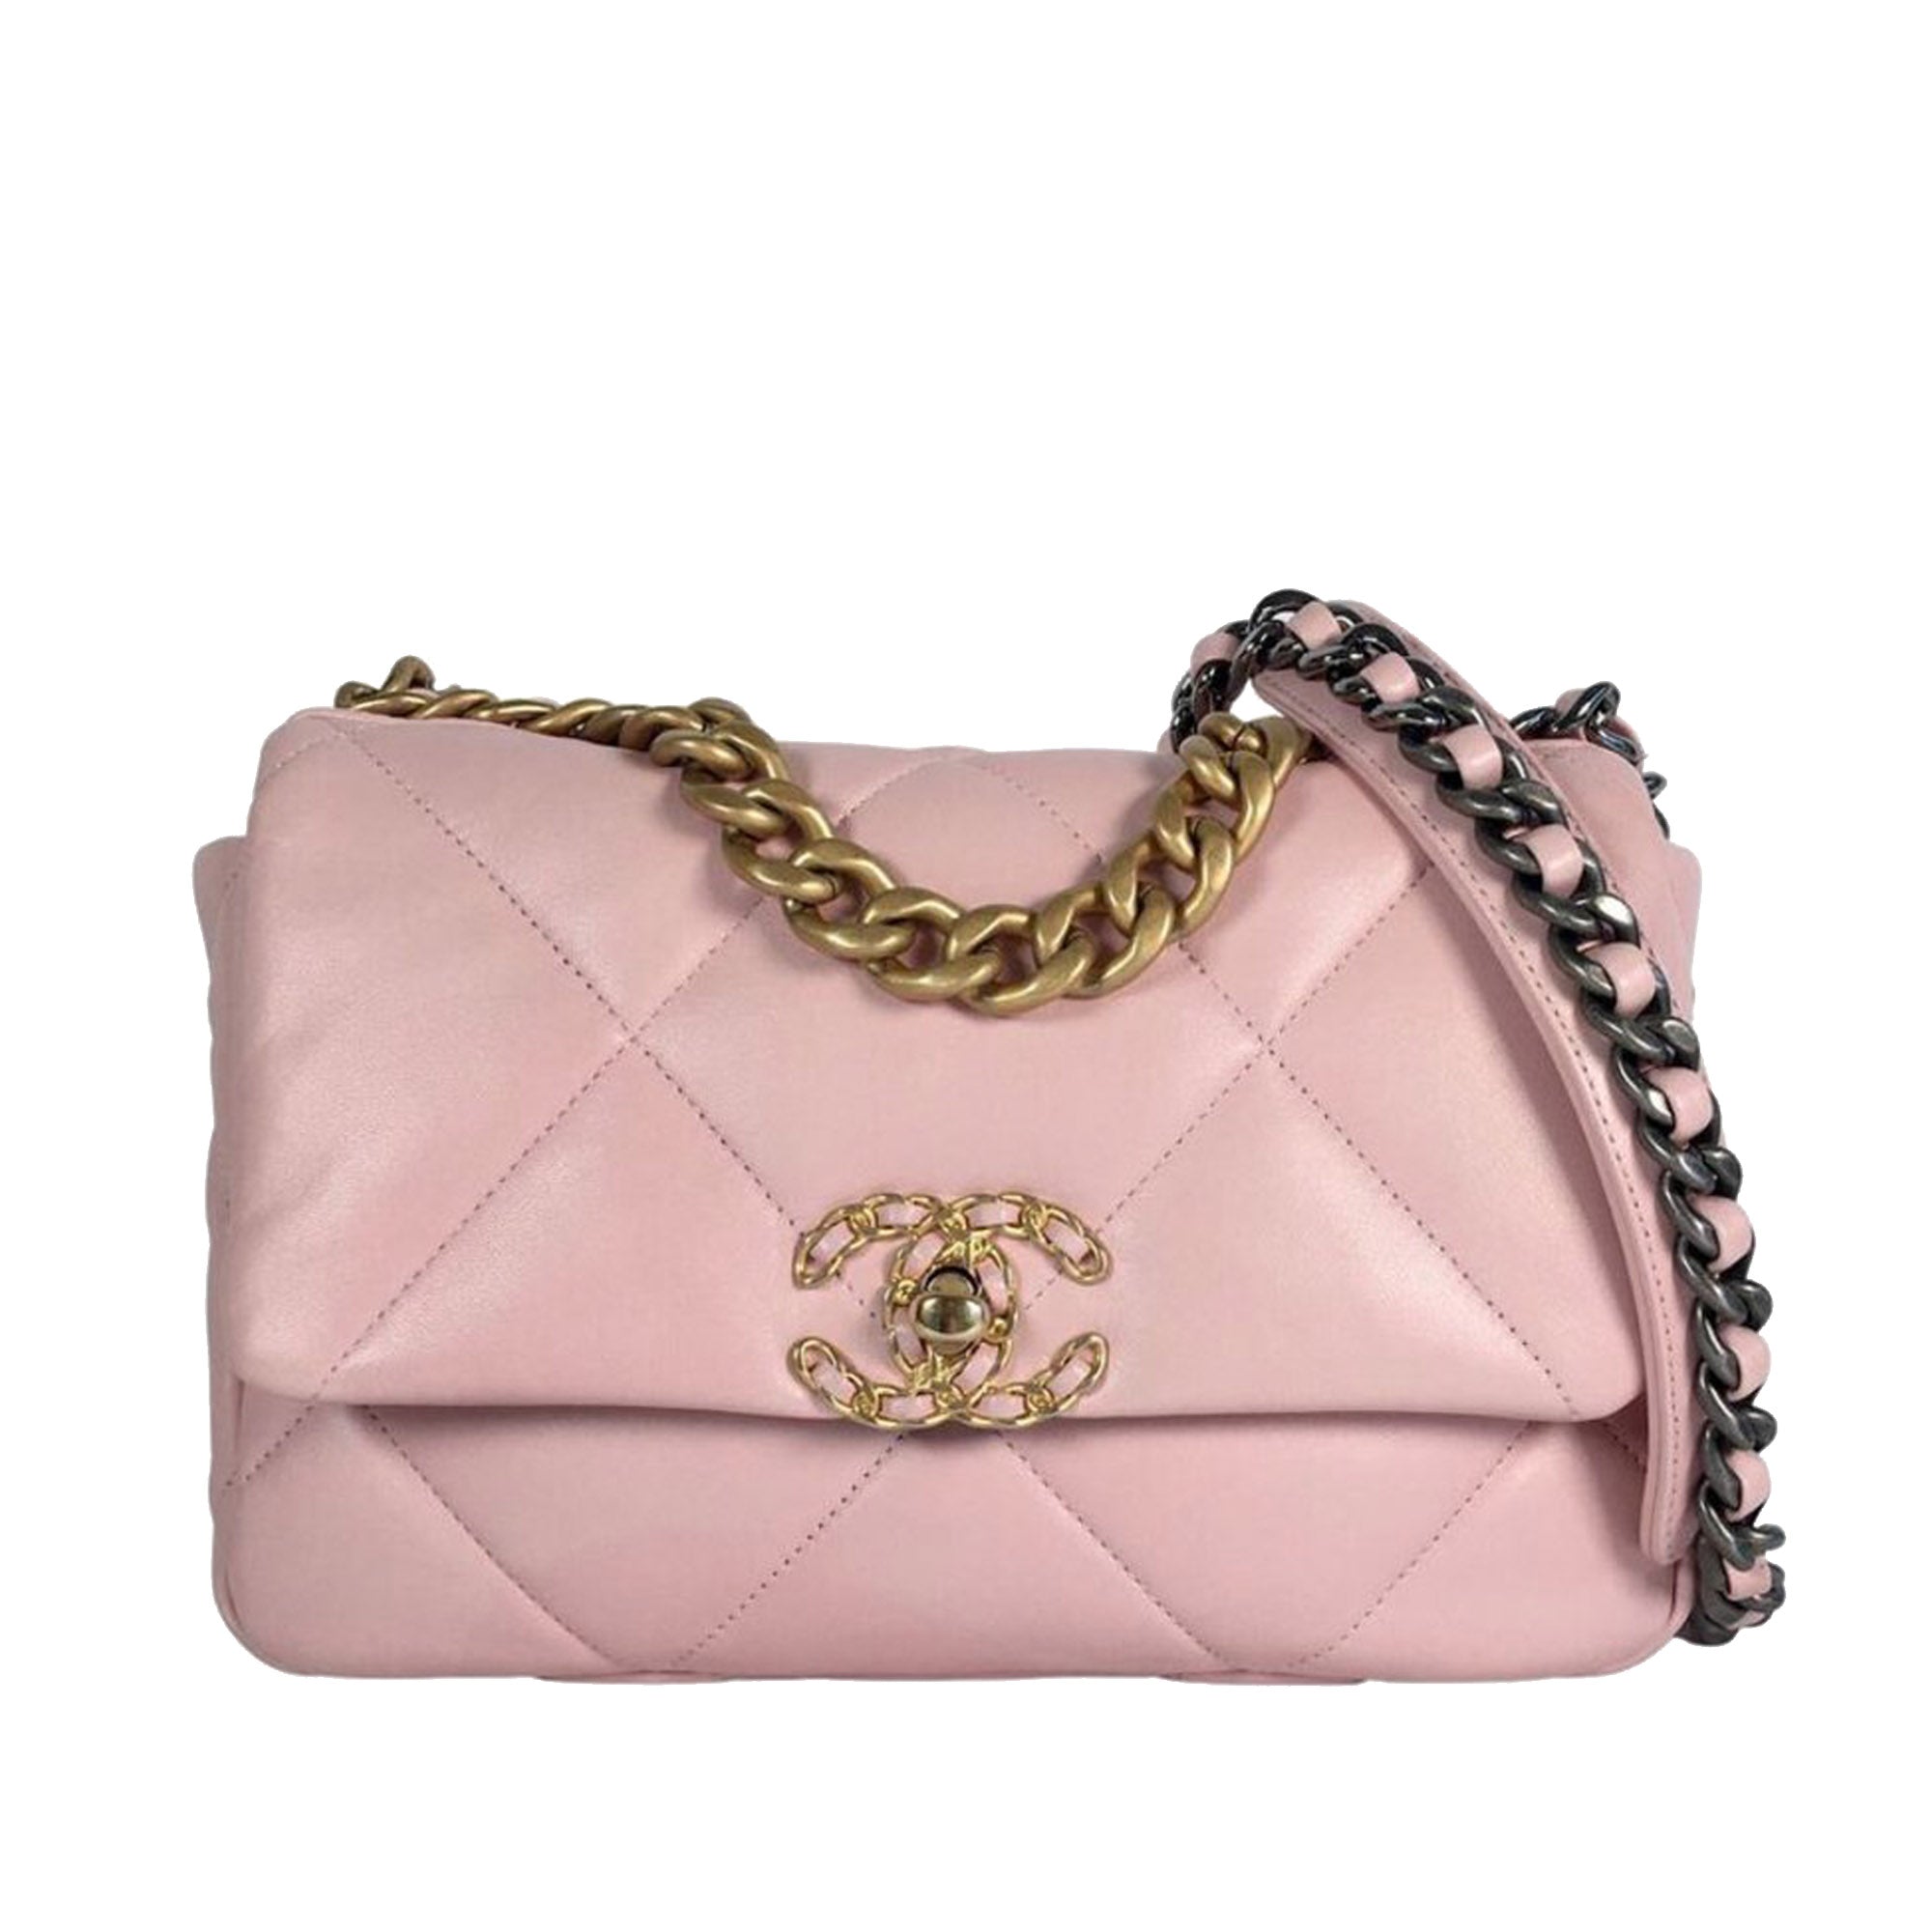 Chanel Quilted Side Note Flap Small, White Lambskin with Gold